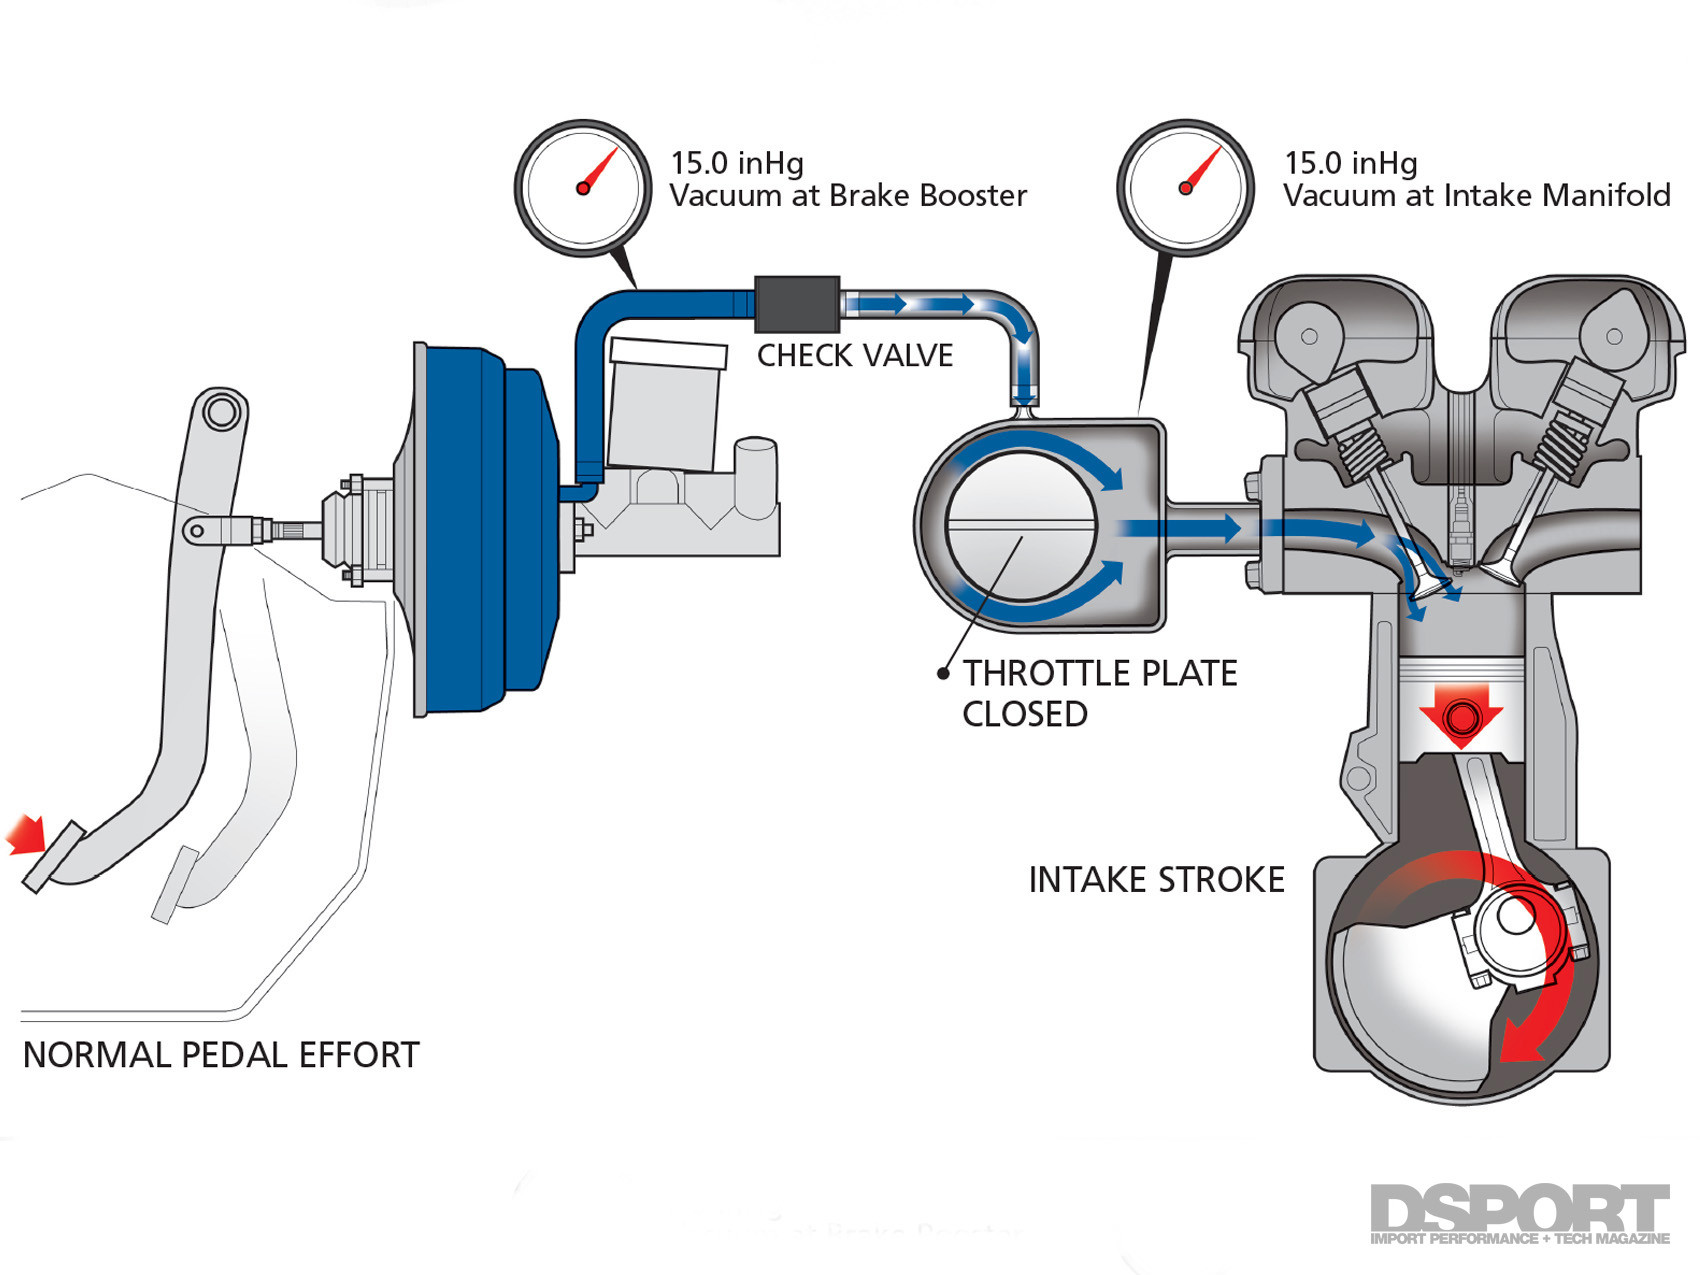 Brake Booster Vacuum Pump Installation Diagram Comp Cams Vacuum Canister - Page 2 Of 3 - Dsport Magazine